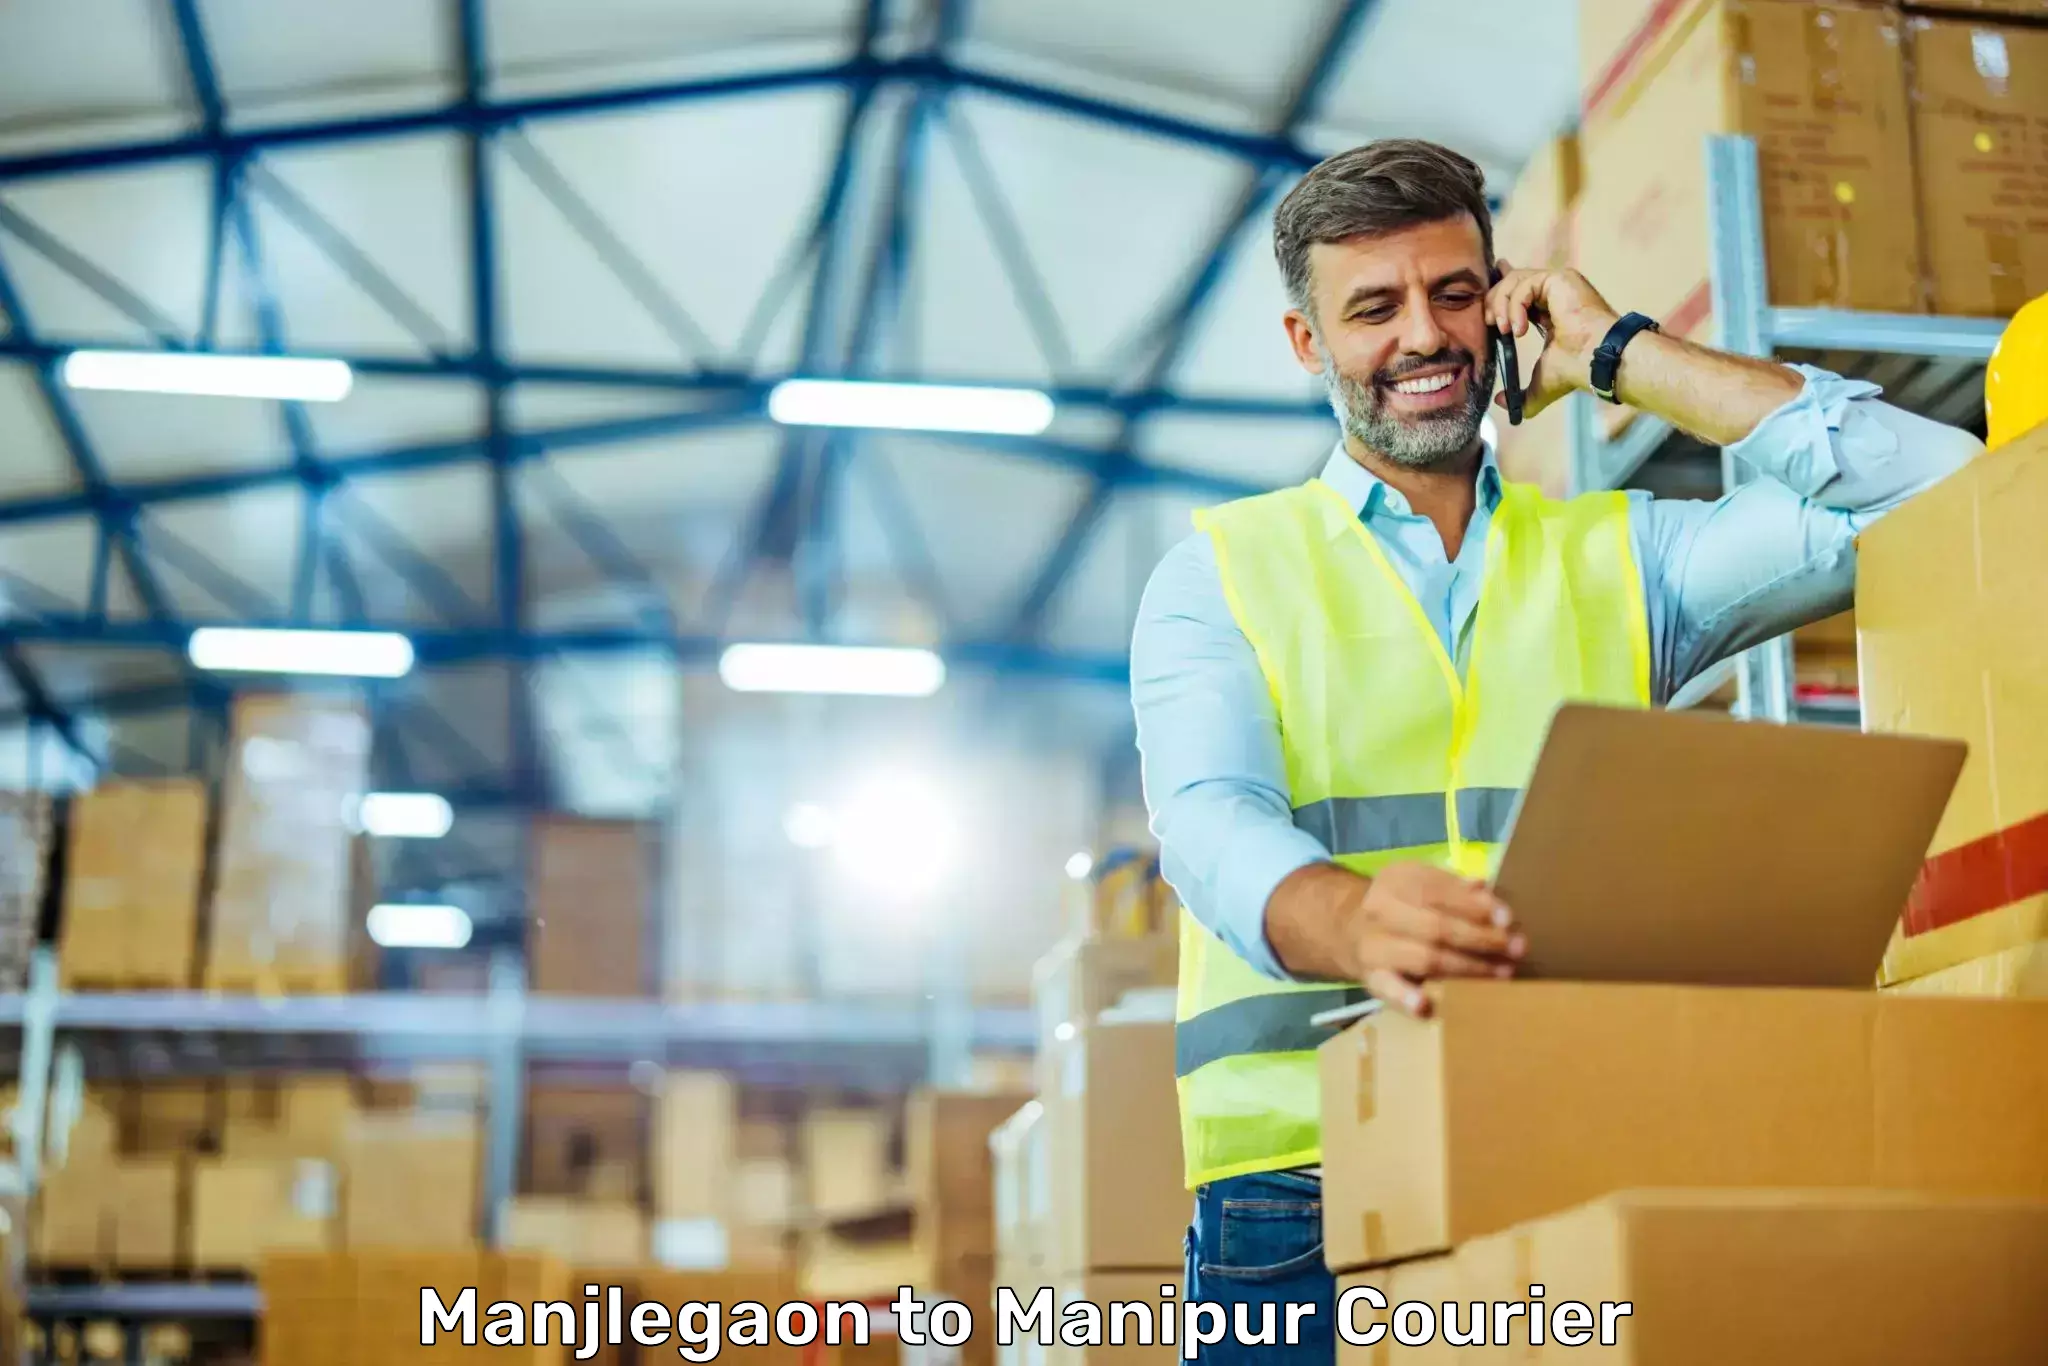 Cost-effective courier options Manjlegaon to Kanti